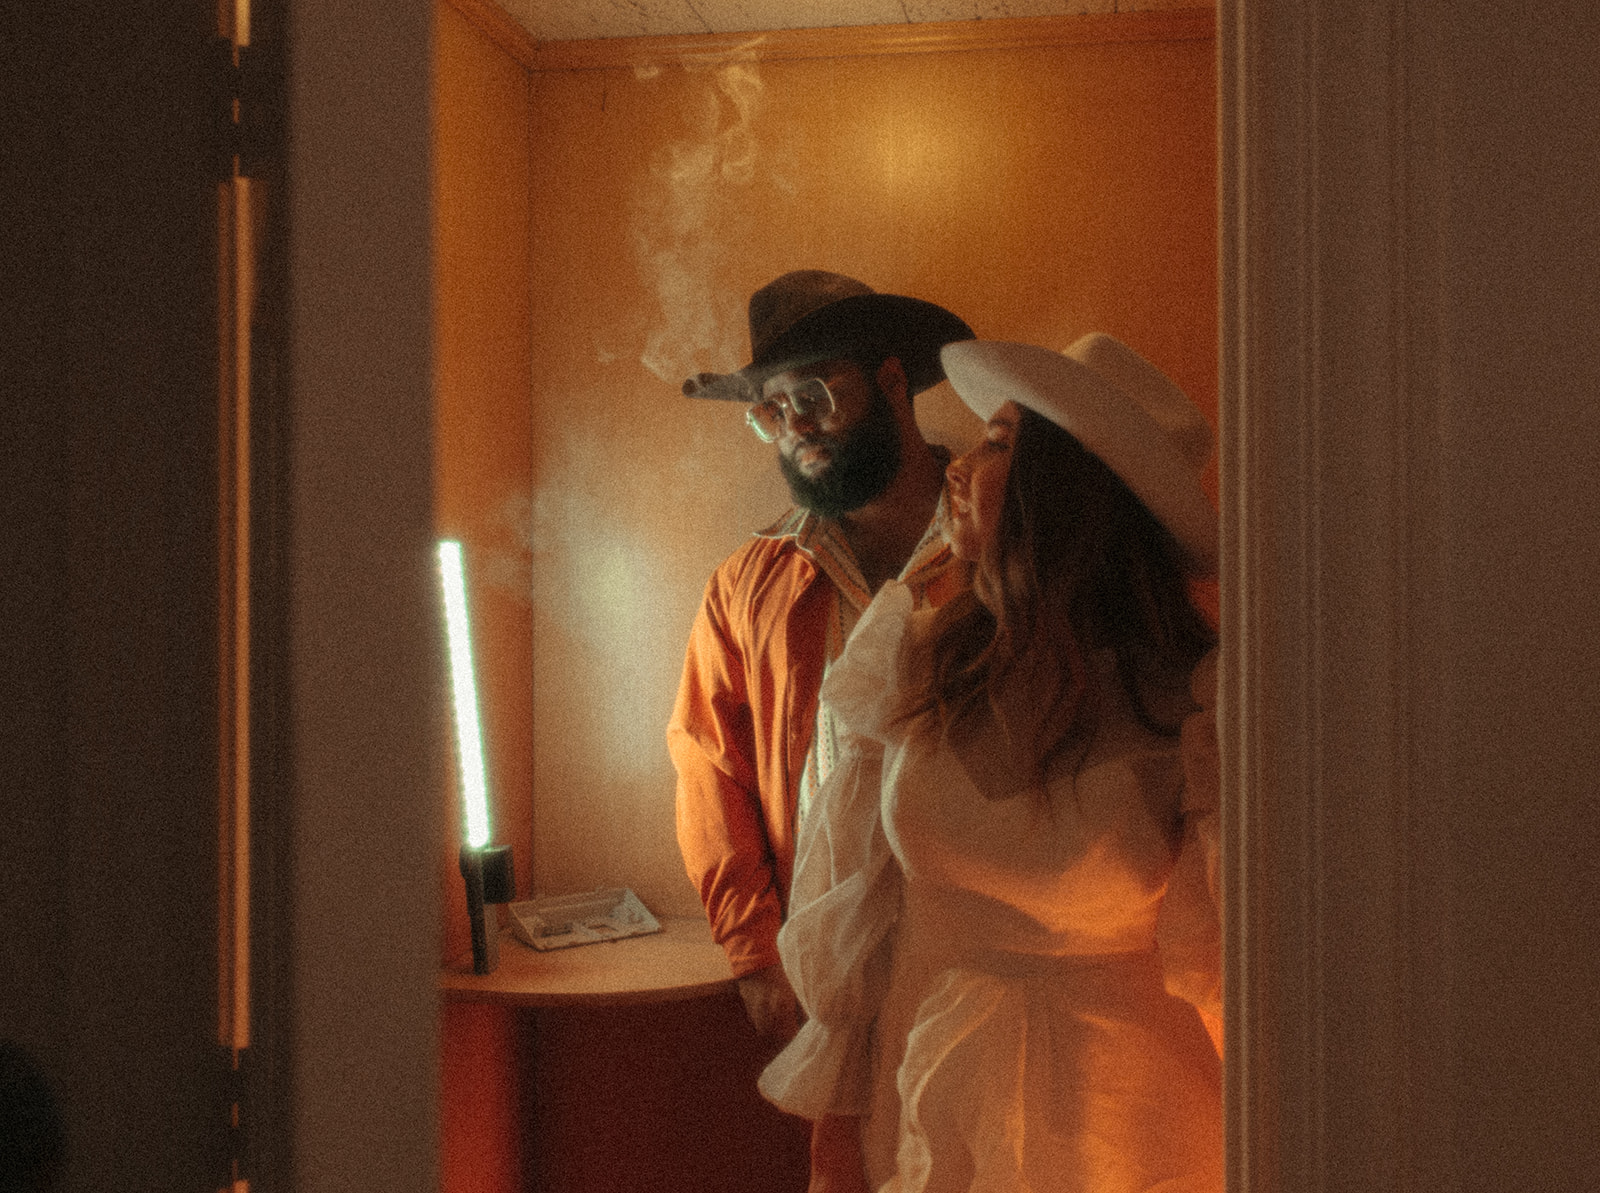 Man and woman smoking in a bathroom